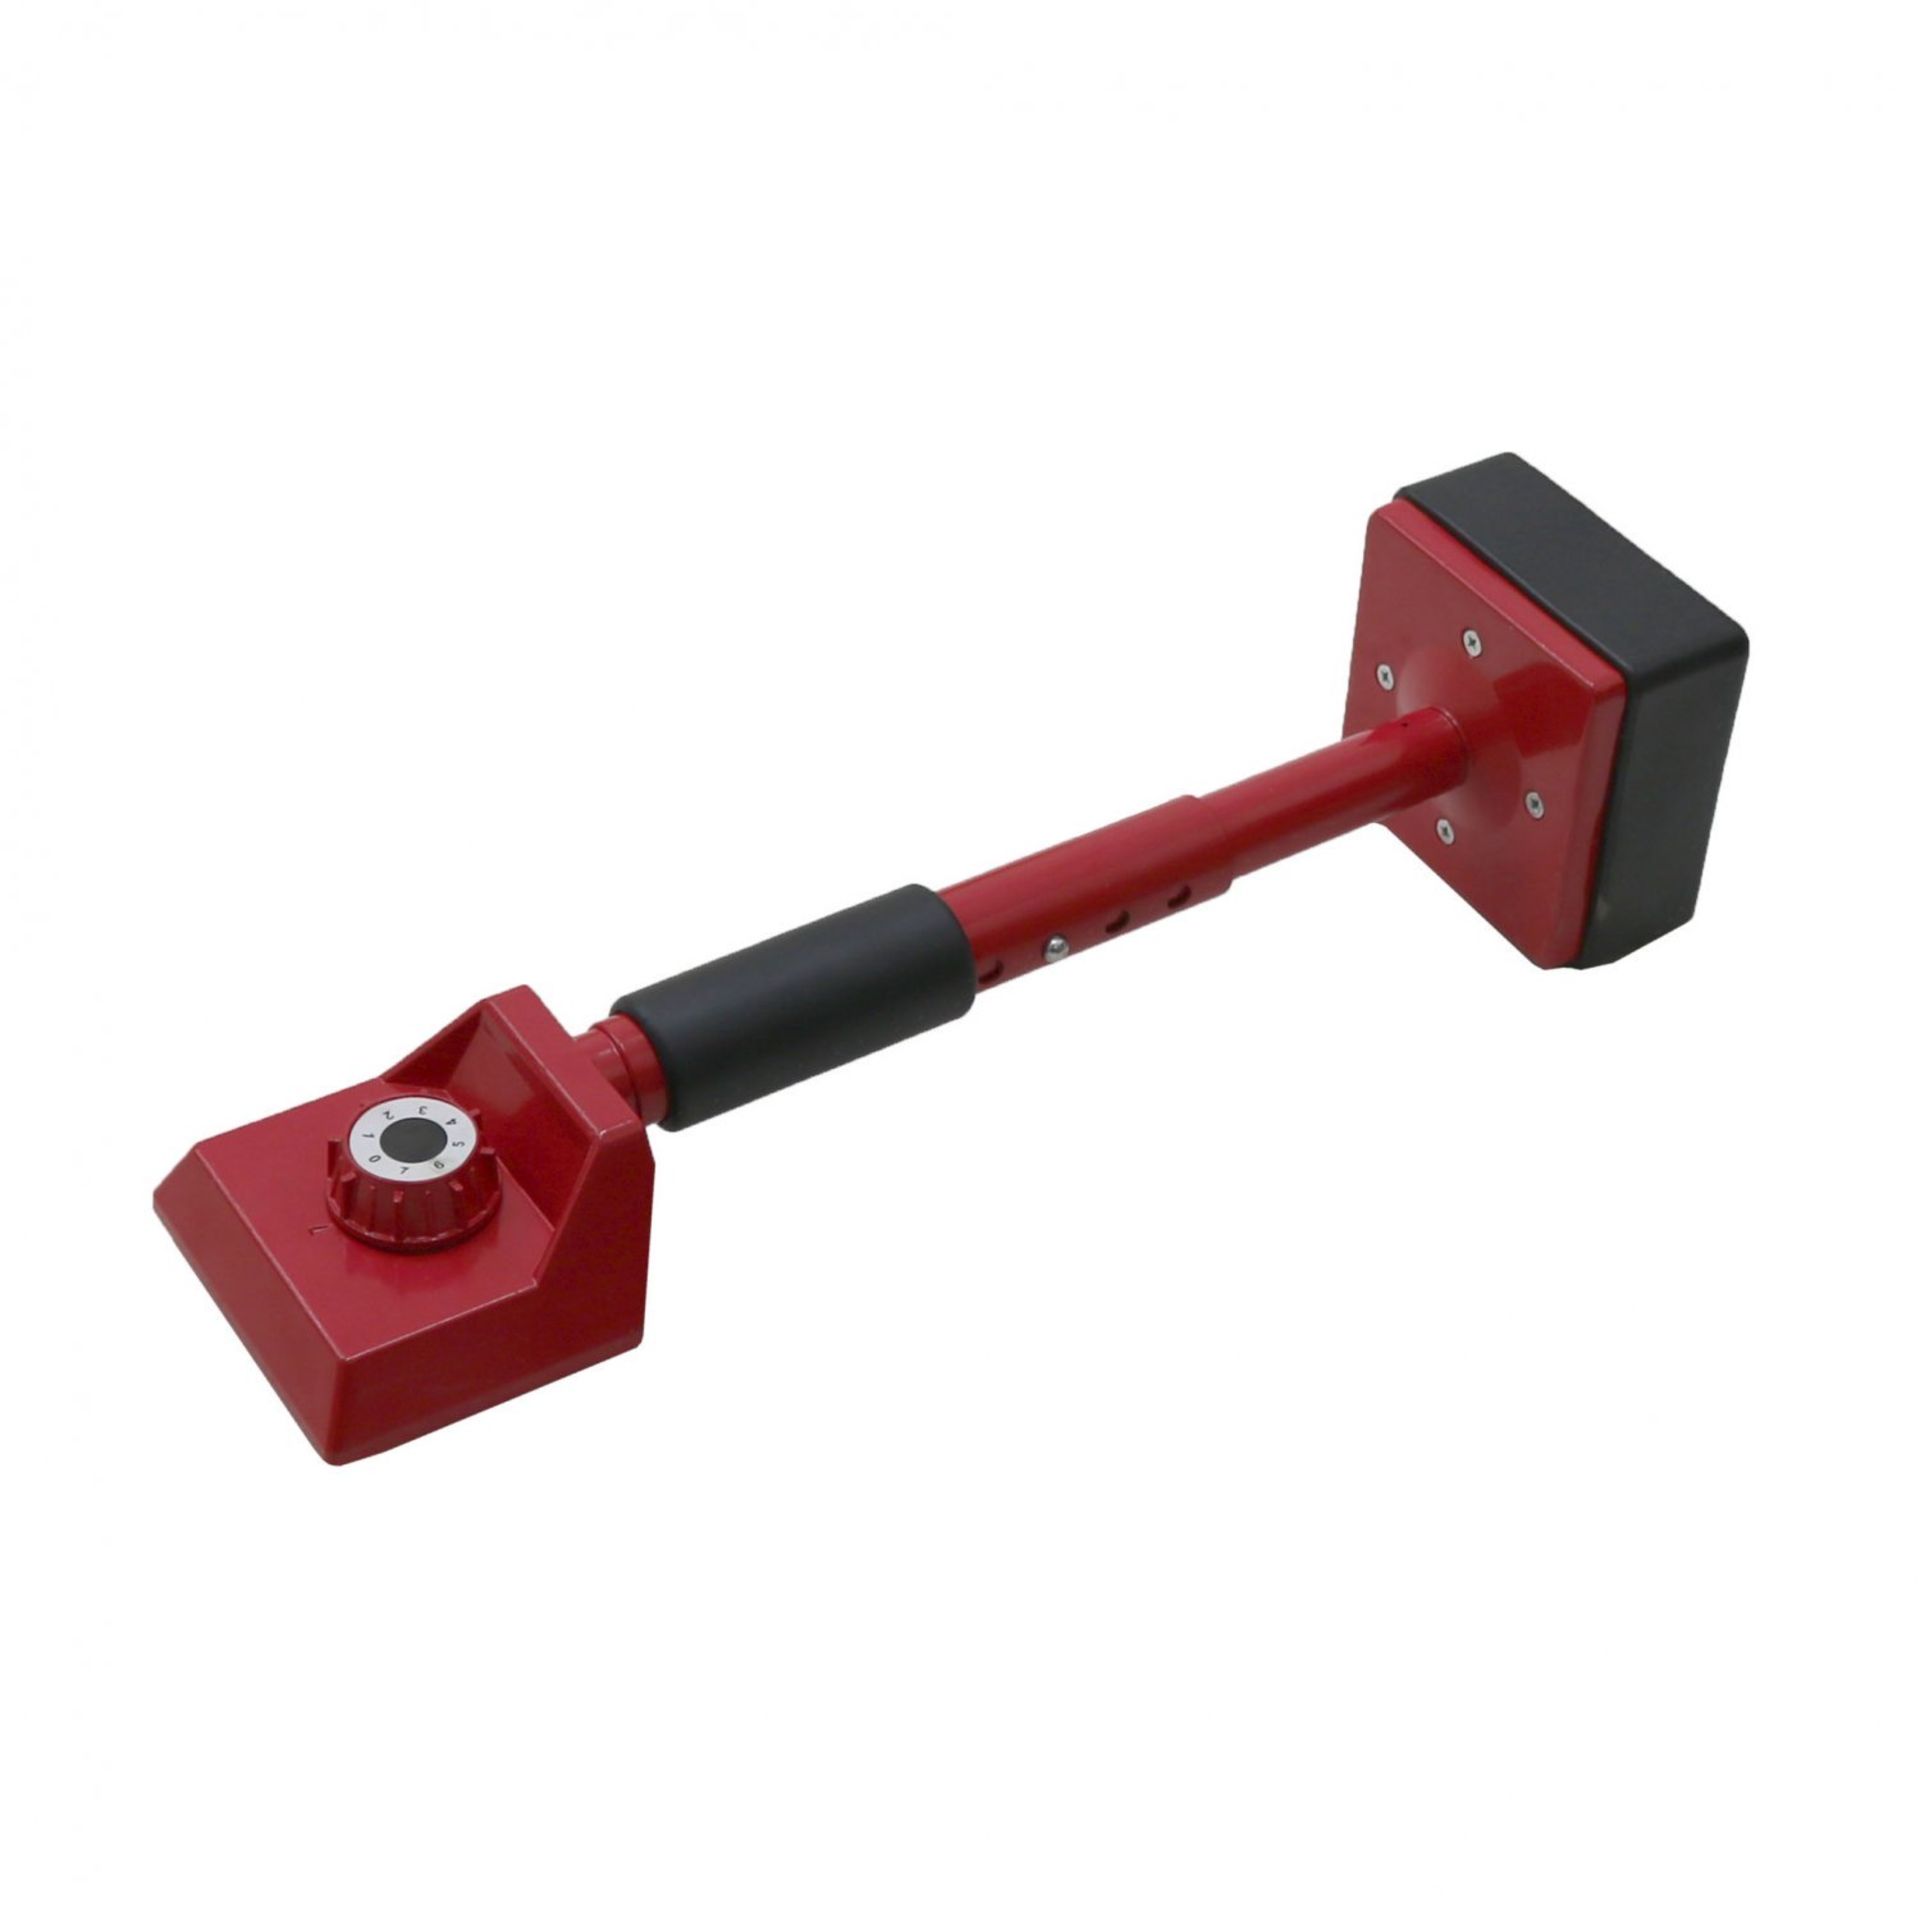 (G6) Professional Knee Kicker Carpet Fitters Tool - Red Extending Steel Tube Body with Four ...